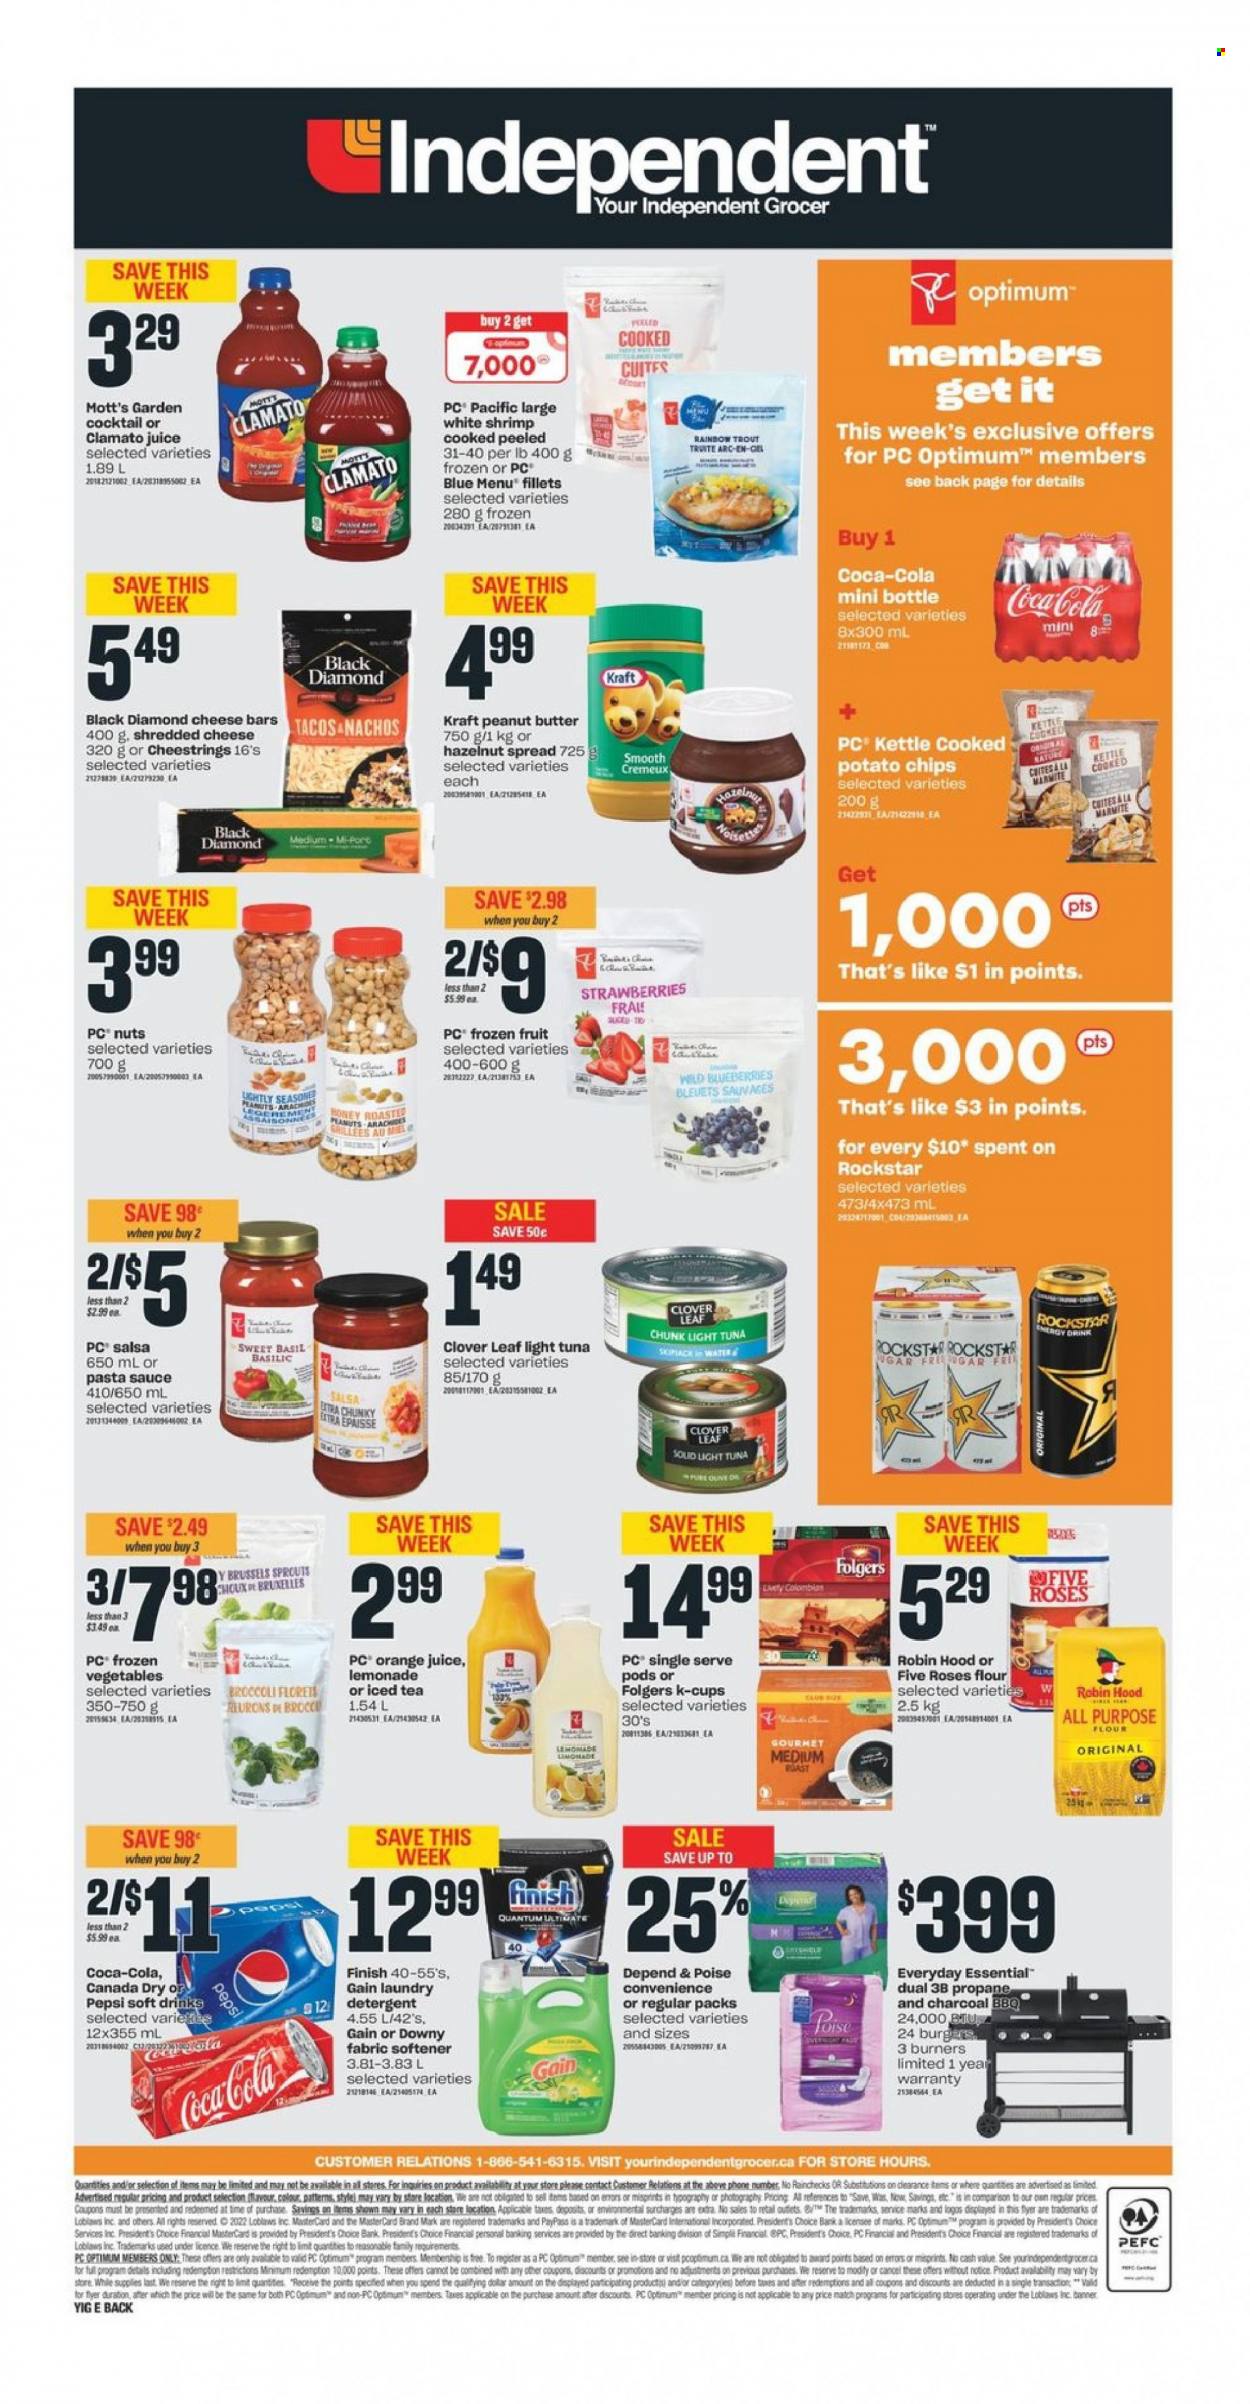 thumbnail - Independent Flyer - May 12, 2022 - May 18, 2022 - Sales products - tacos, brussel sprouts, blueberries, strawberries, Mott's, trout, tuna, shrimps, pasta sauce, sauce, Kraft®, shredded cheese, string cheese, Président, Clover, Ola, frozen vegetables, potato chips, light tuna, esponja, salsa, honey, peanut butter, hazelnut spread, Canada Dry, Coca-Cola, lemonade, Pepsi, orange juice, juice, ice tea, Clamato, soft drink, Rockstar, Folgers, coffee capsules, K-Cups, Gain, fabric softener, Downy Laundry, Optimum, detergent. Page 2.